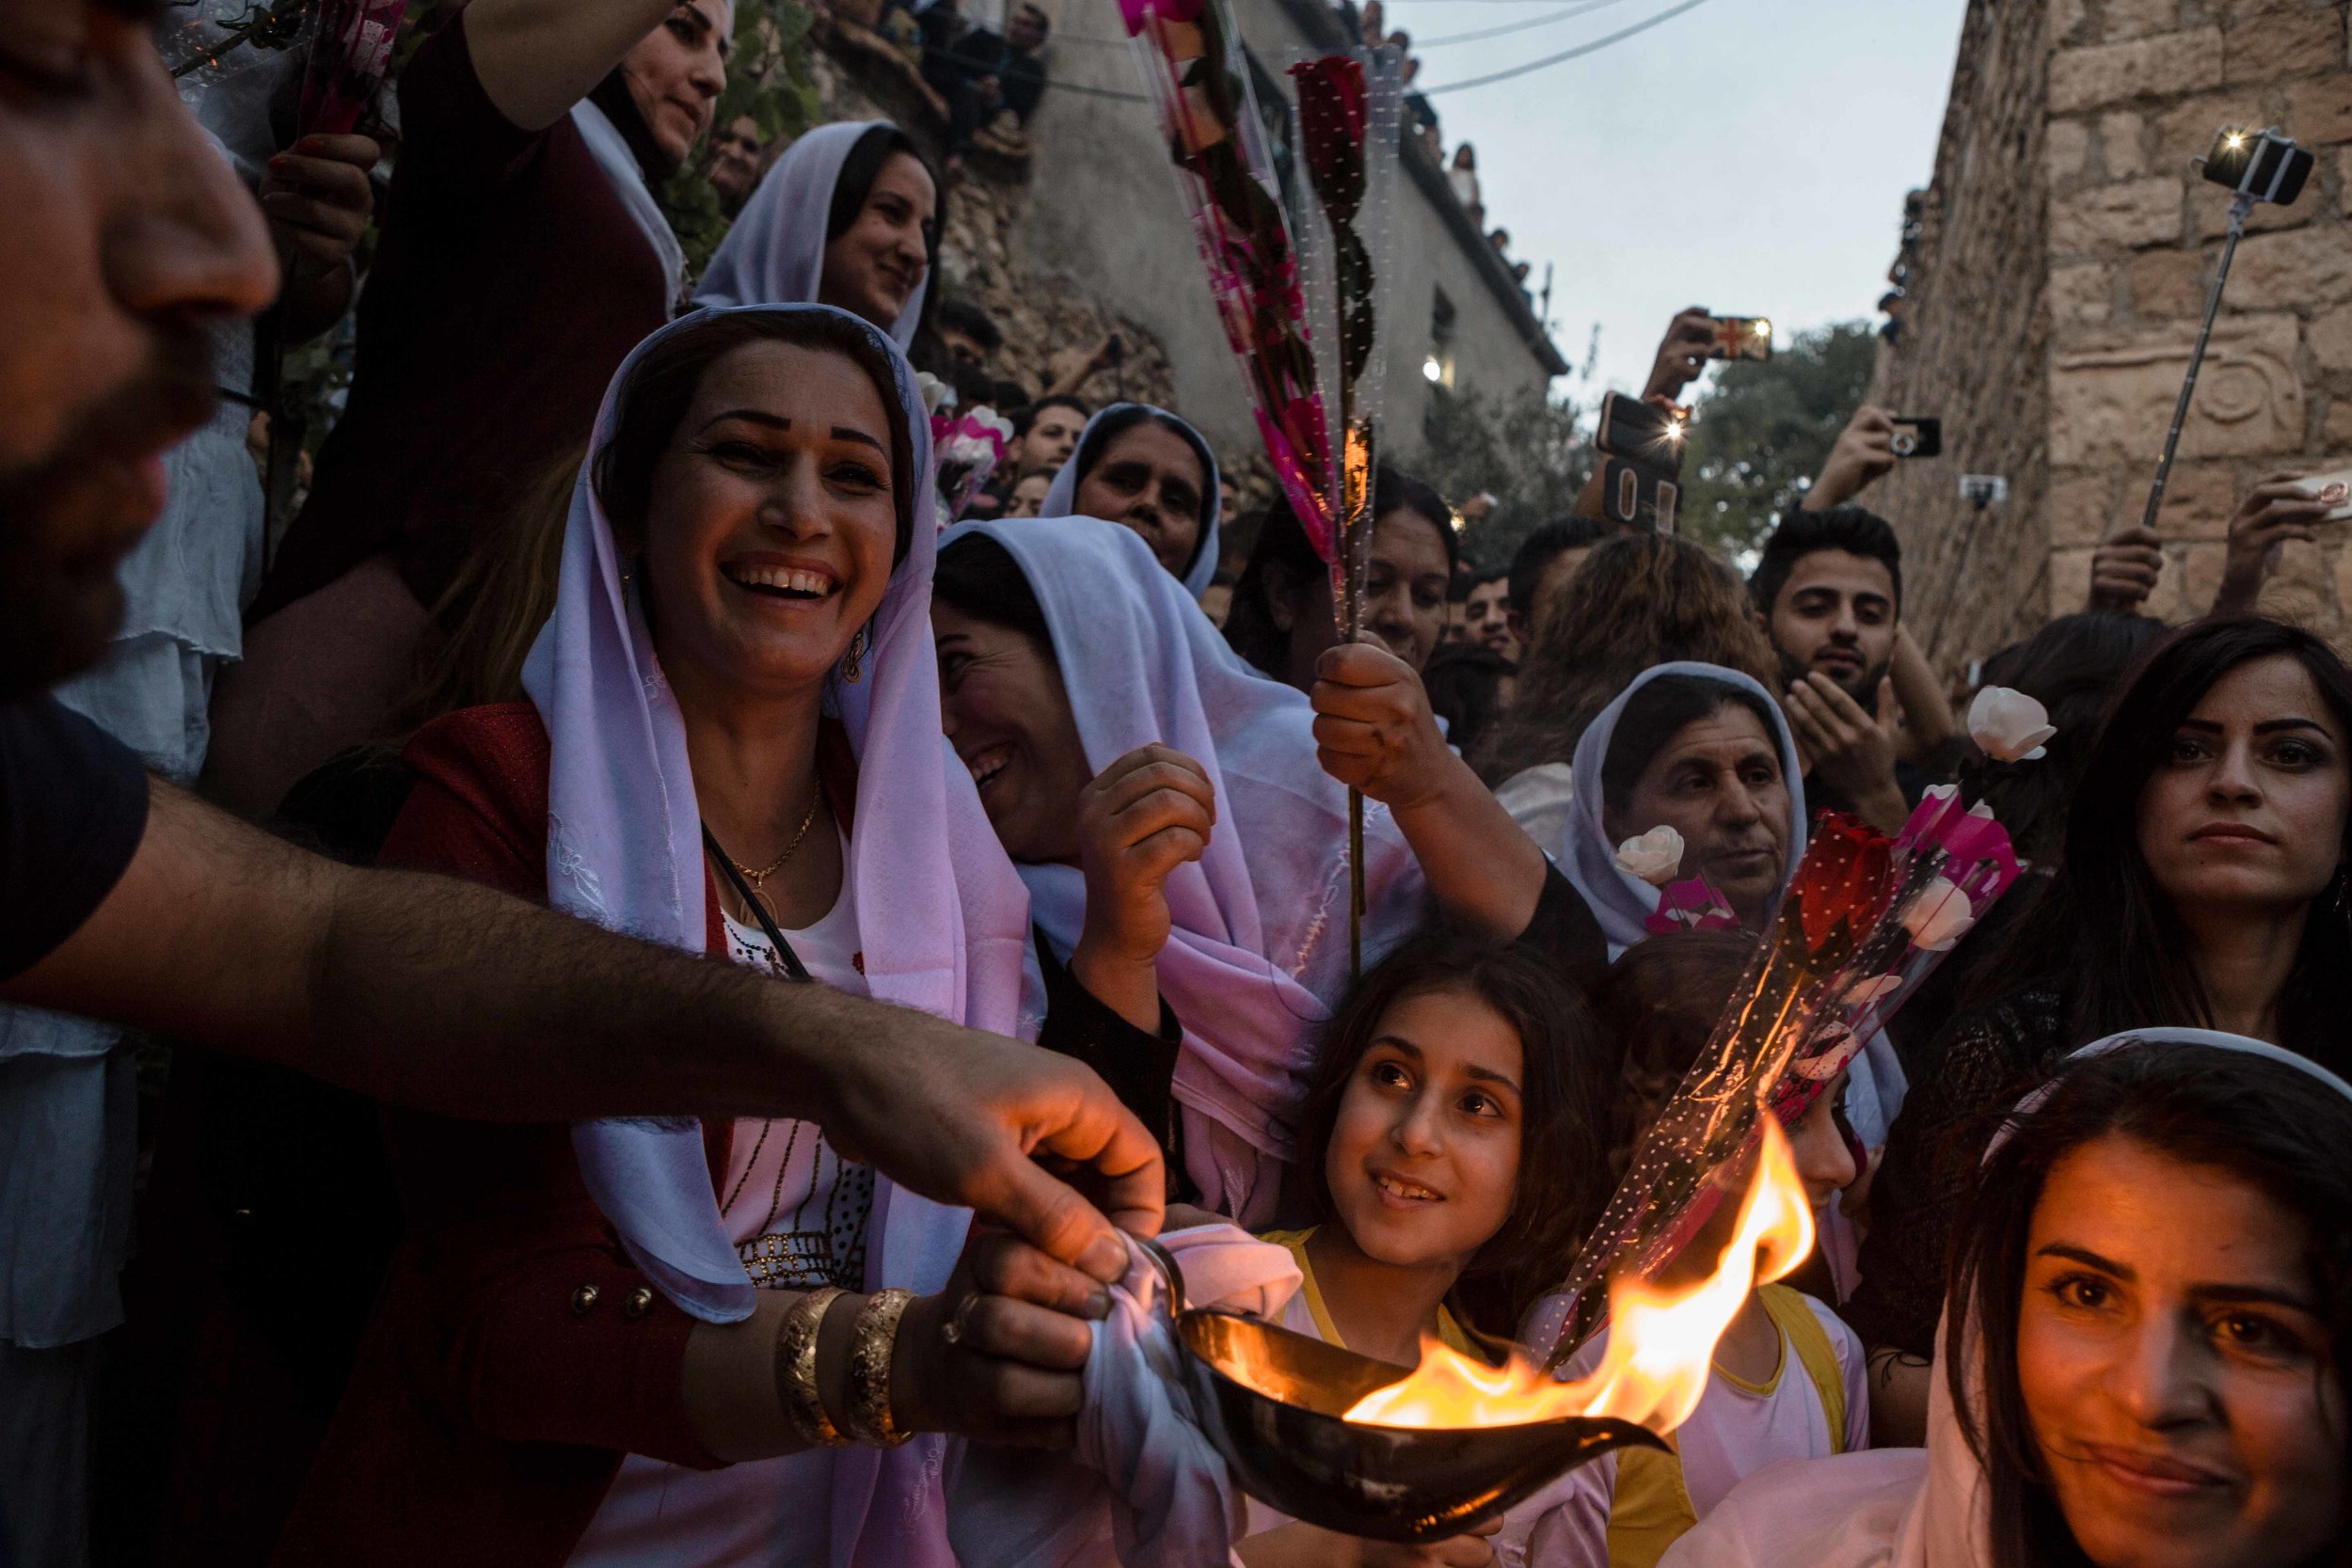  Thousands of Yazidis gather at the religions holy temple of Lalish for the lighting of the candle celebration for Yazidi new year. 